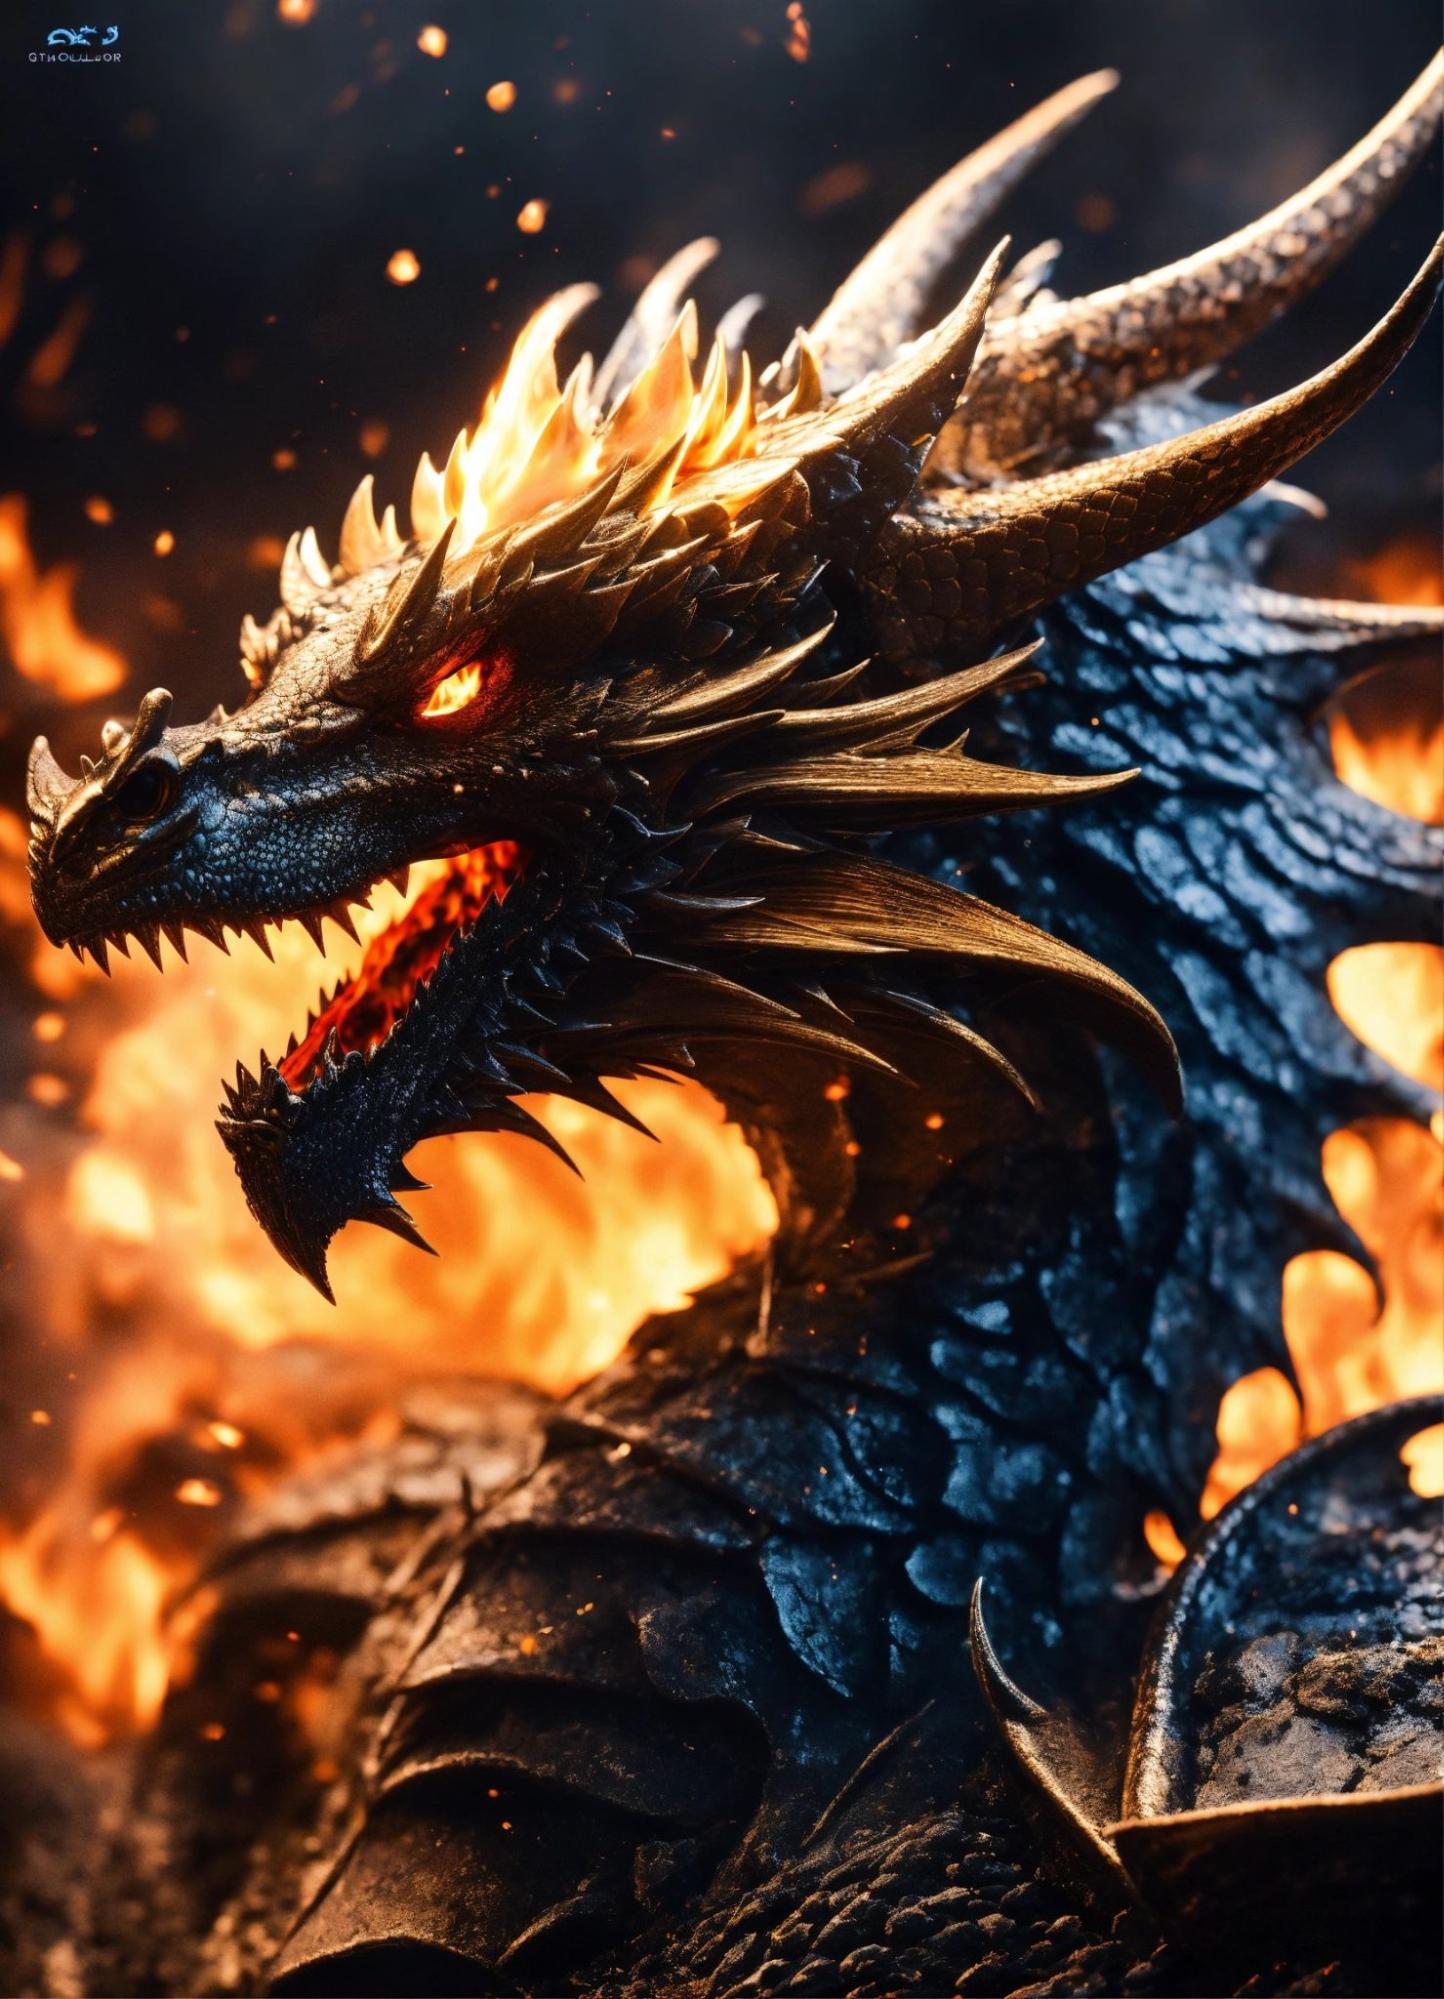 Dragon emerging from fire